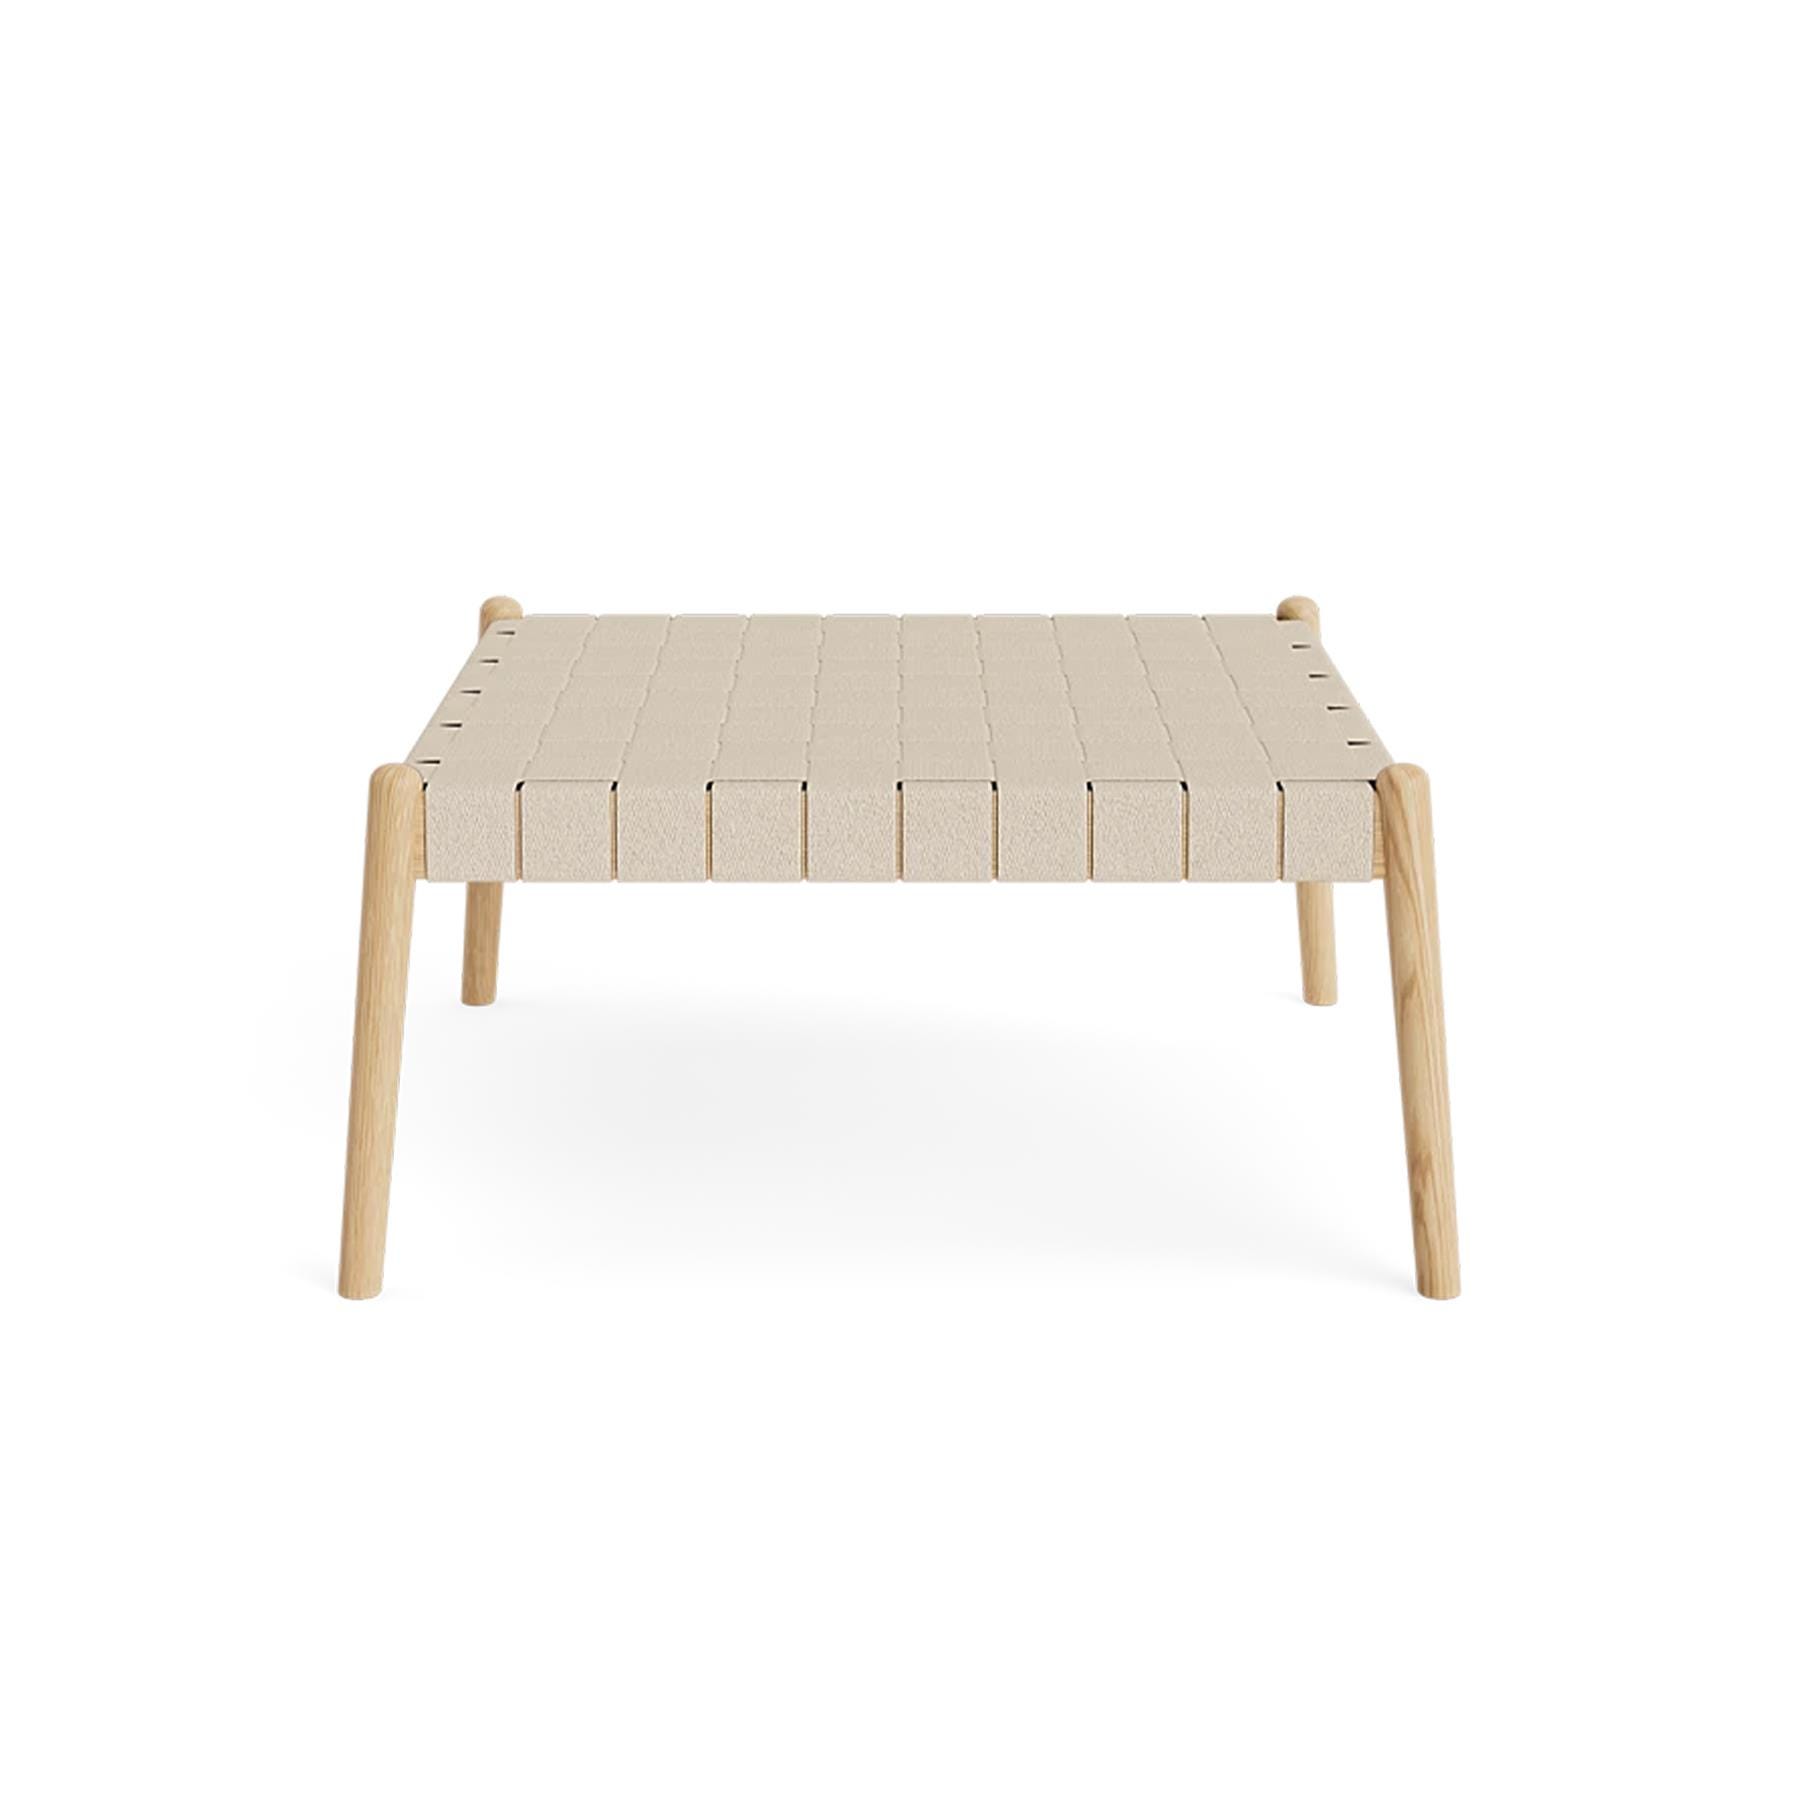 Make Nordic Umi Coffee Table Light Wood Designer Furniture From Holloways Of Ludlow